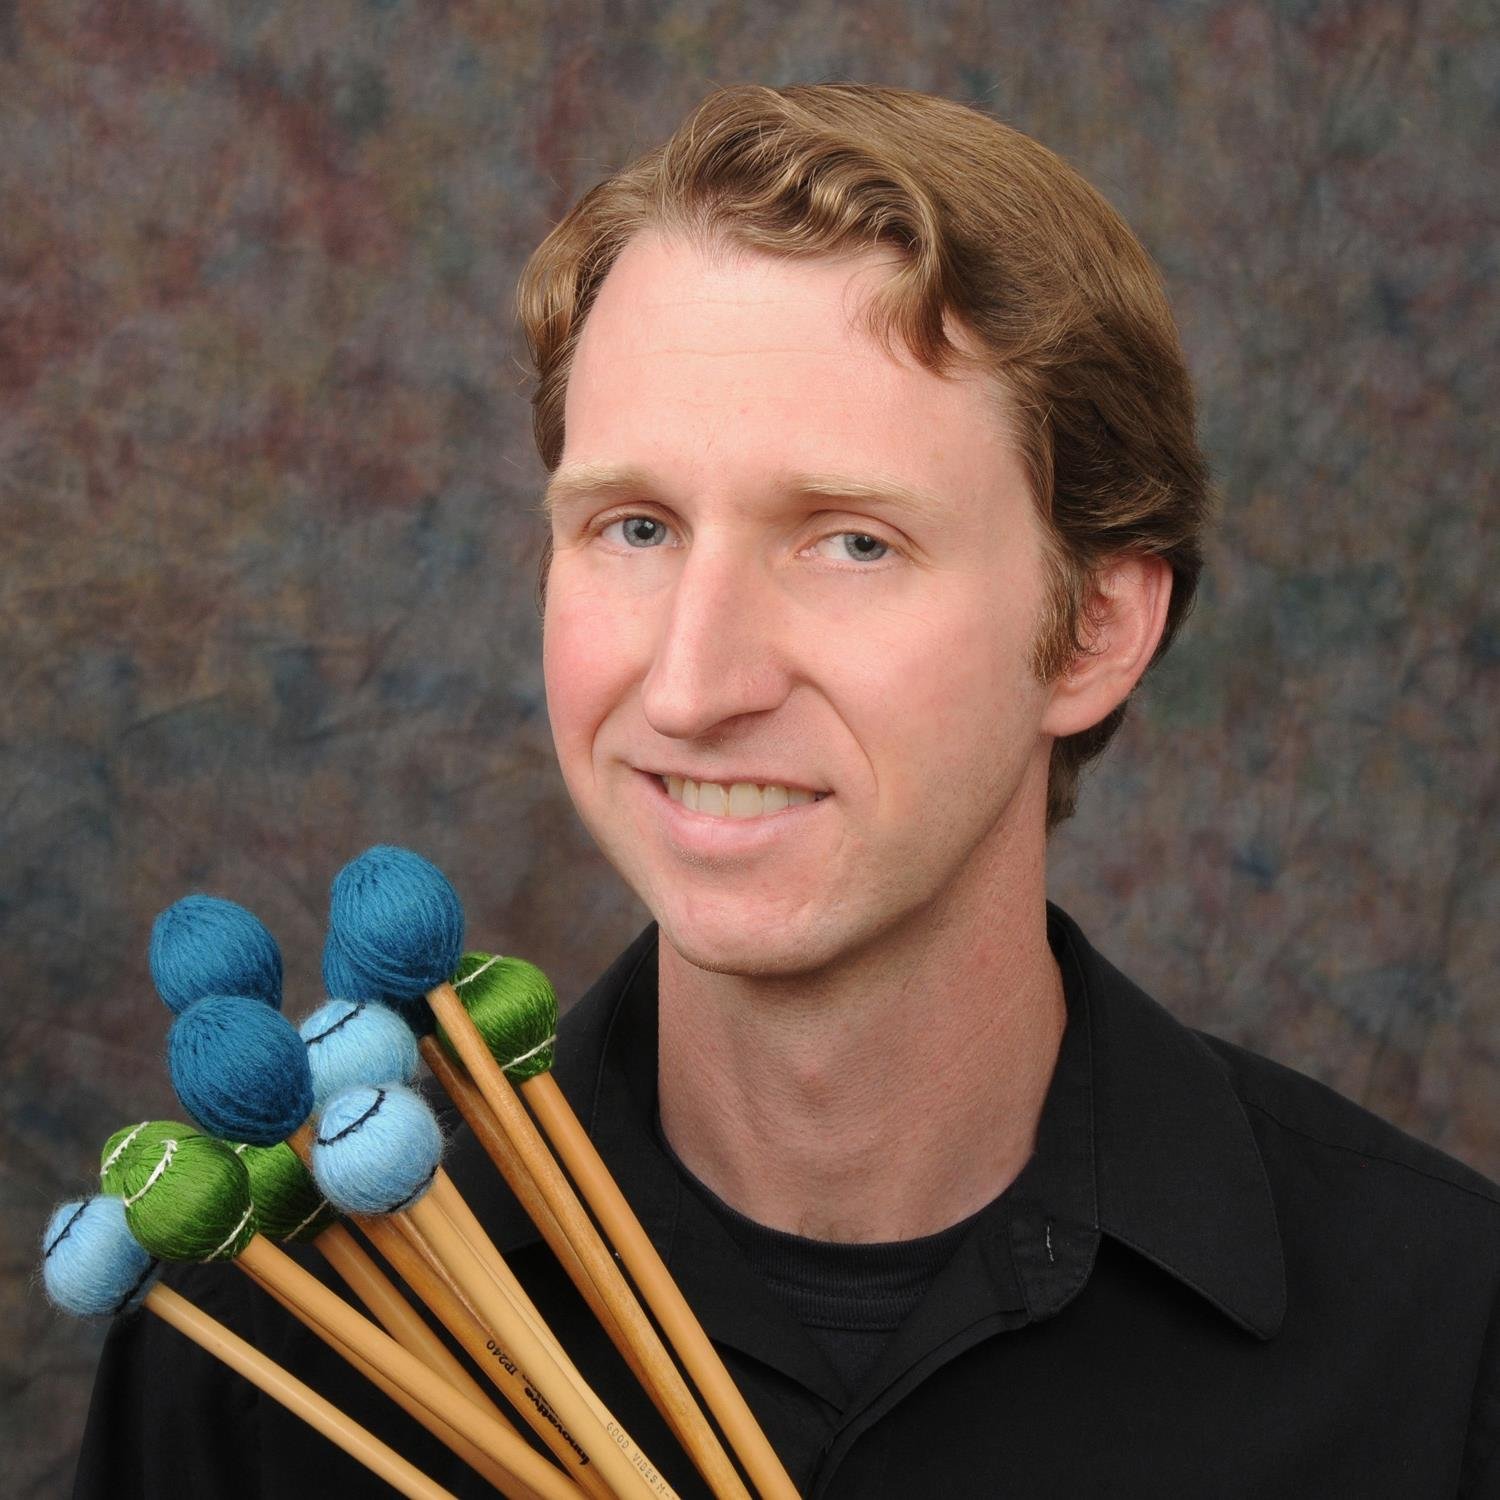 Percussionist, Chief of Staff, Pacific Tiger, Educator, Husband to a great wife, Dad of two little kids, Music Lover, mediocre golfer, Giants/Niners fan